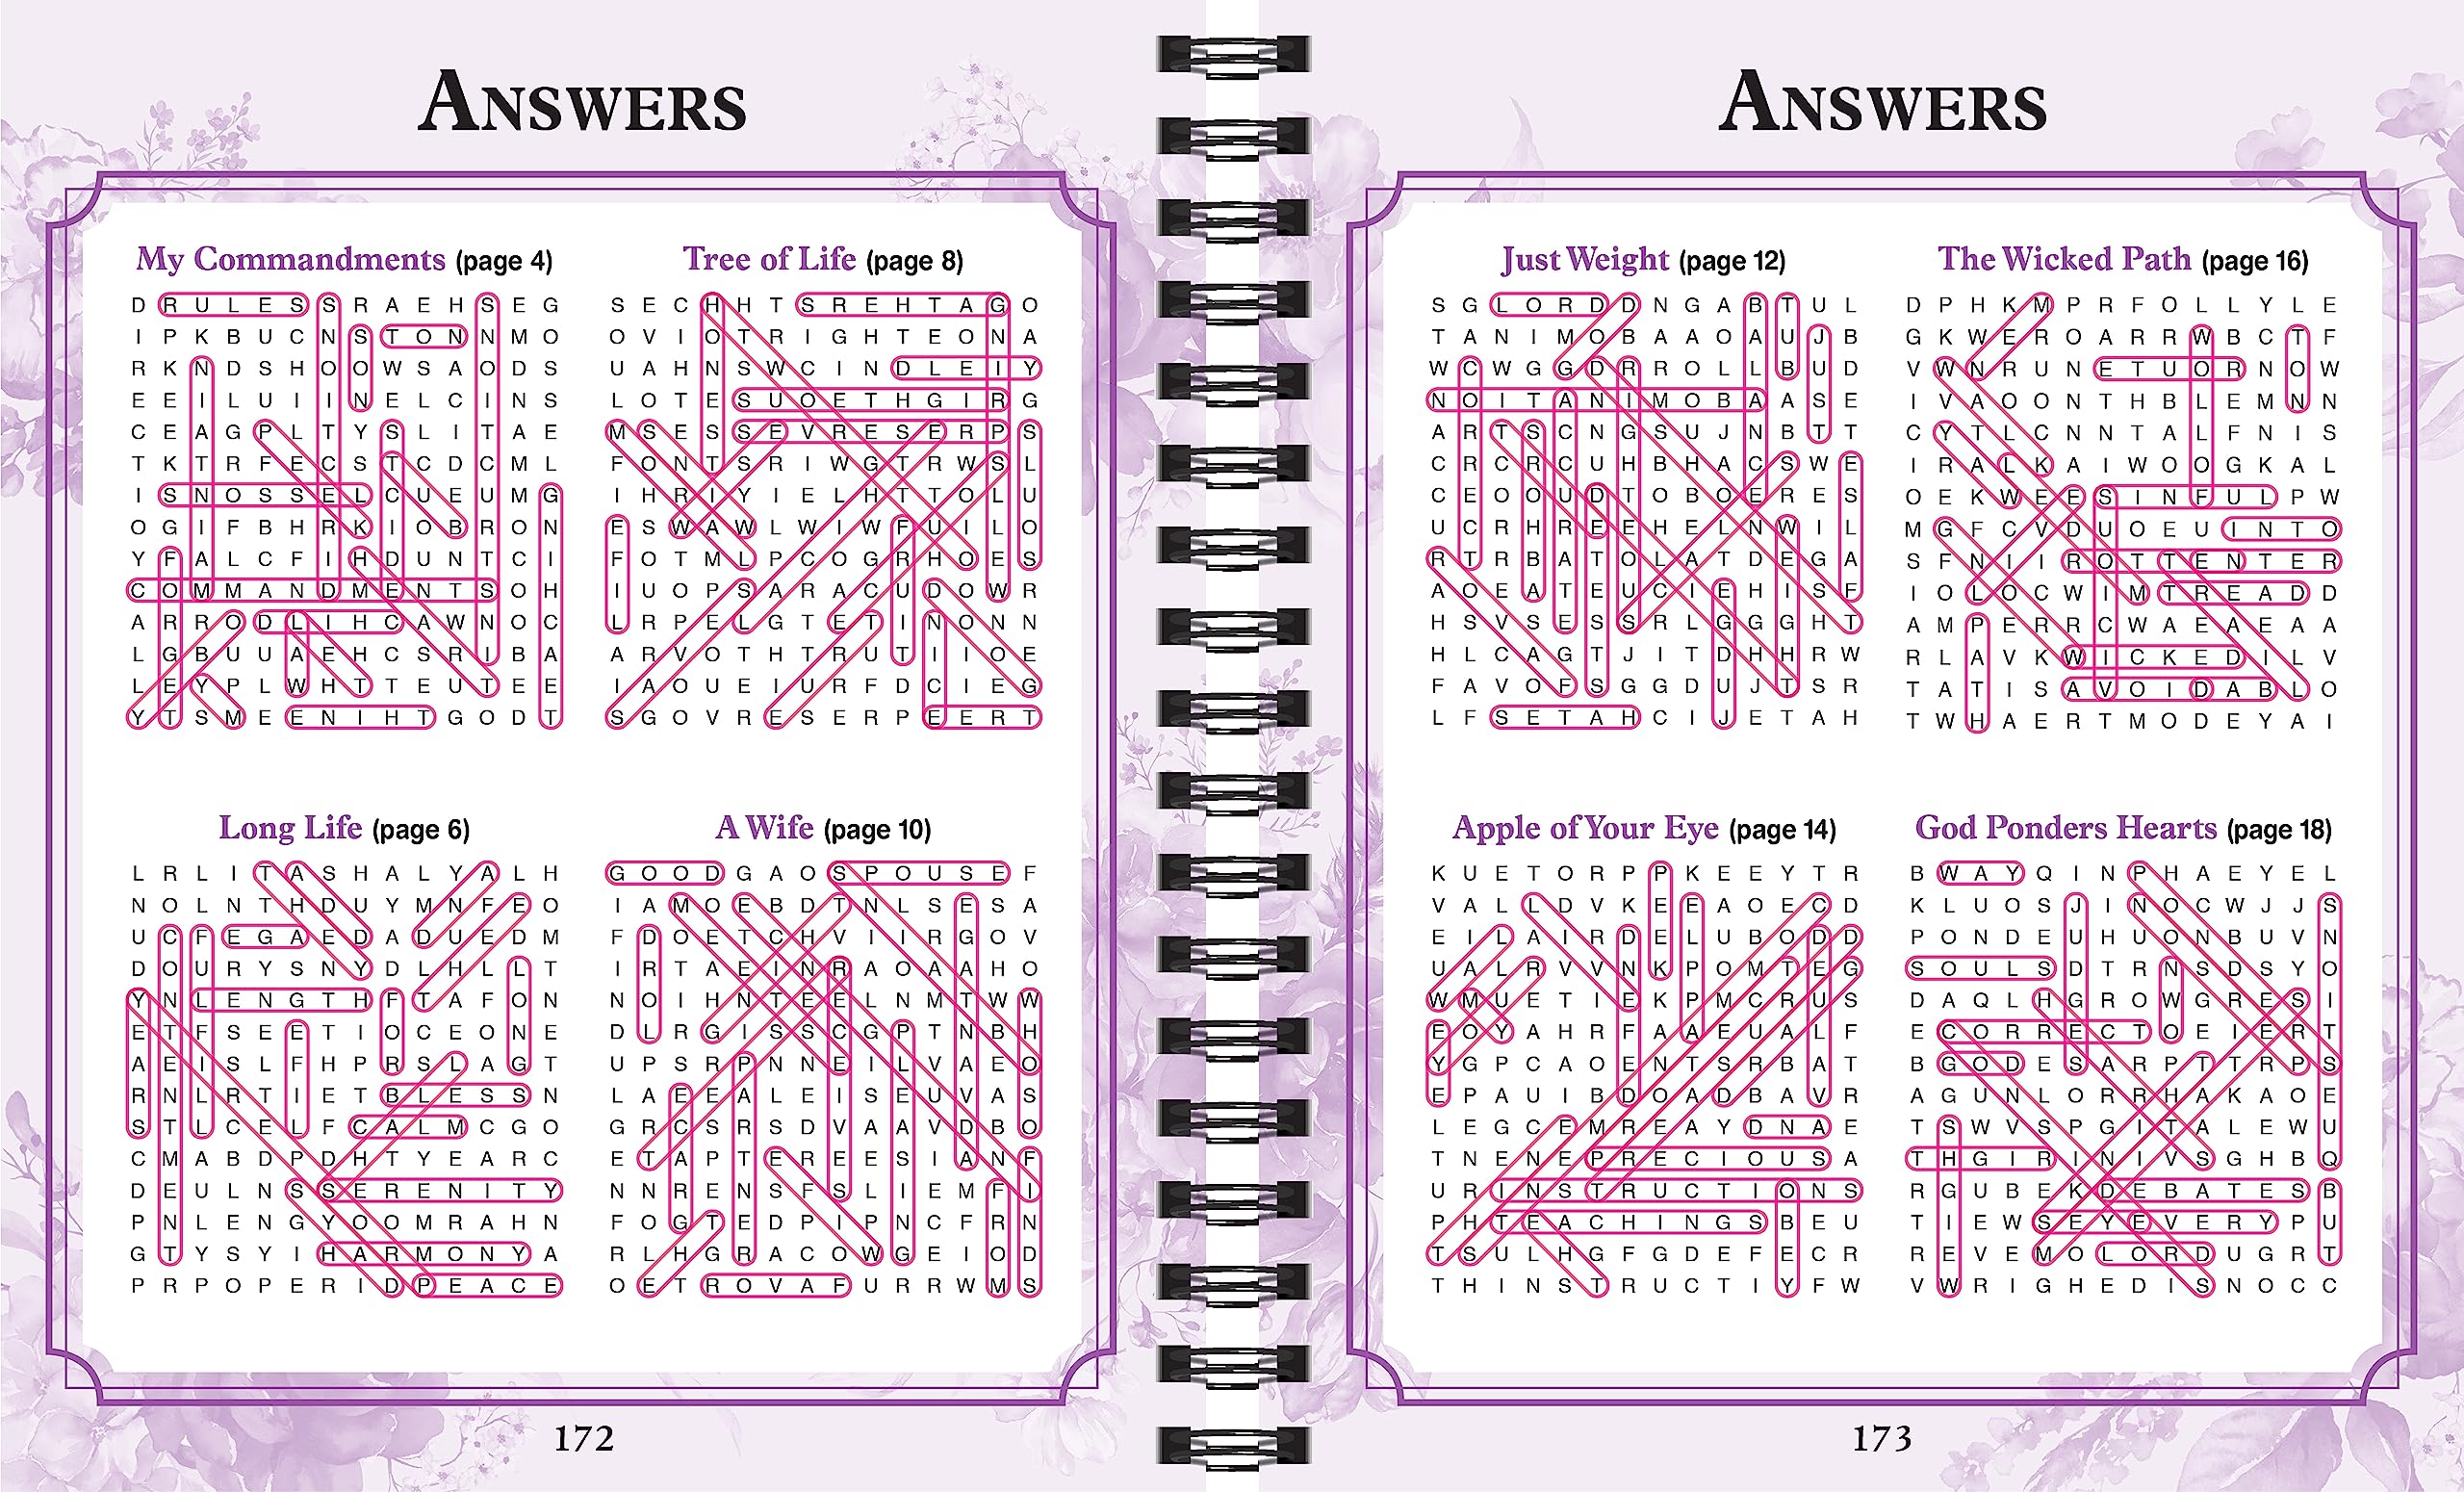 Brain Games - Bible Word Search: Wisdom of Proverbs Large Print